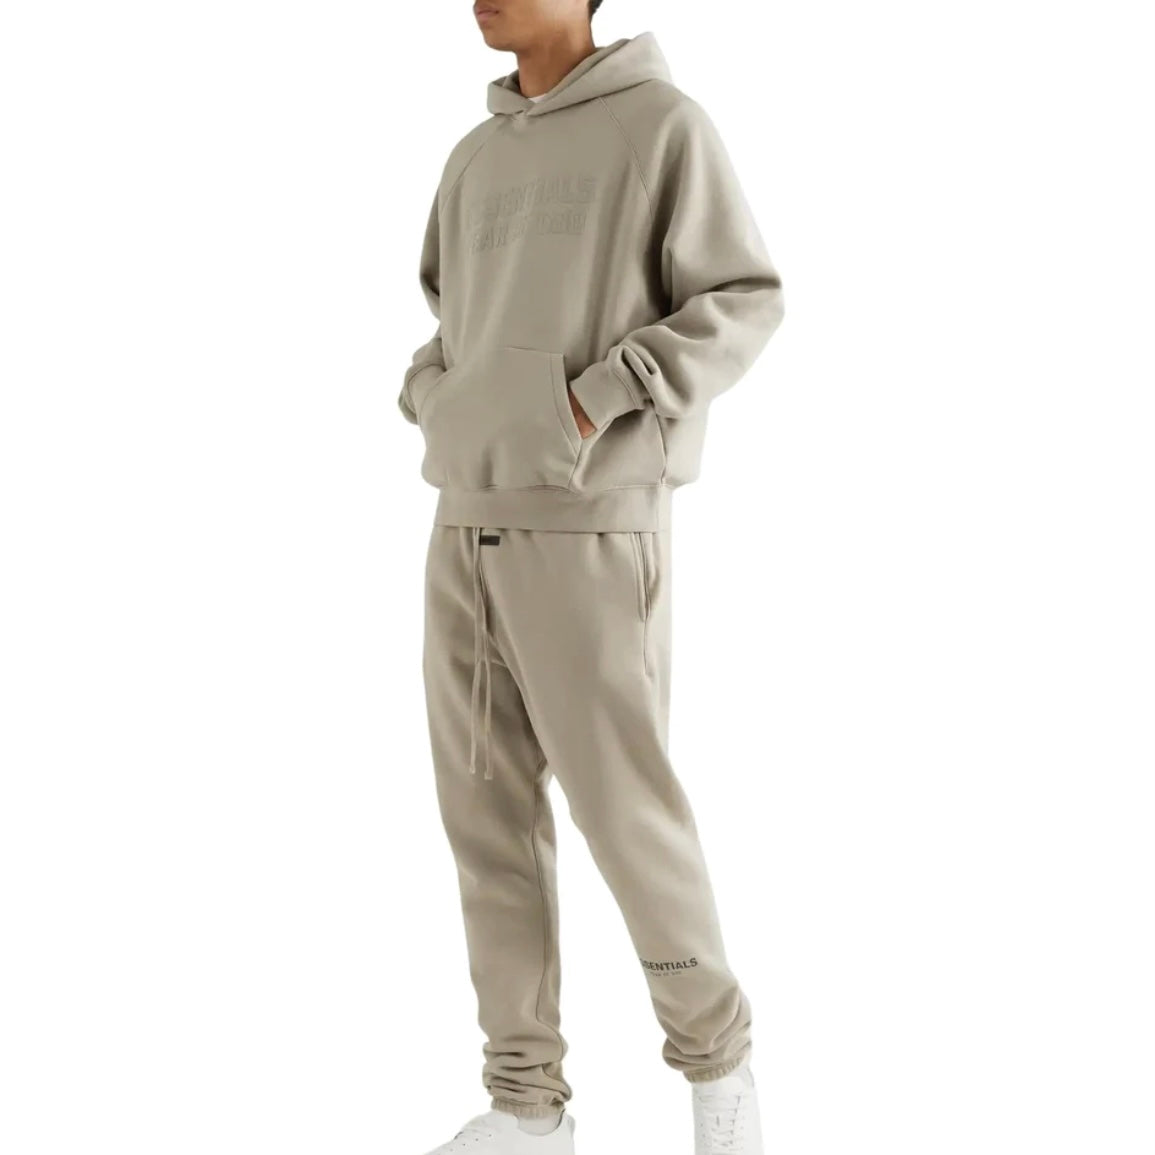 ESSENTIALS AW22 TRACKSUIT ‘SEAL’ - FULL SET